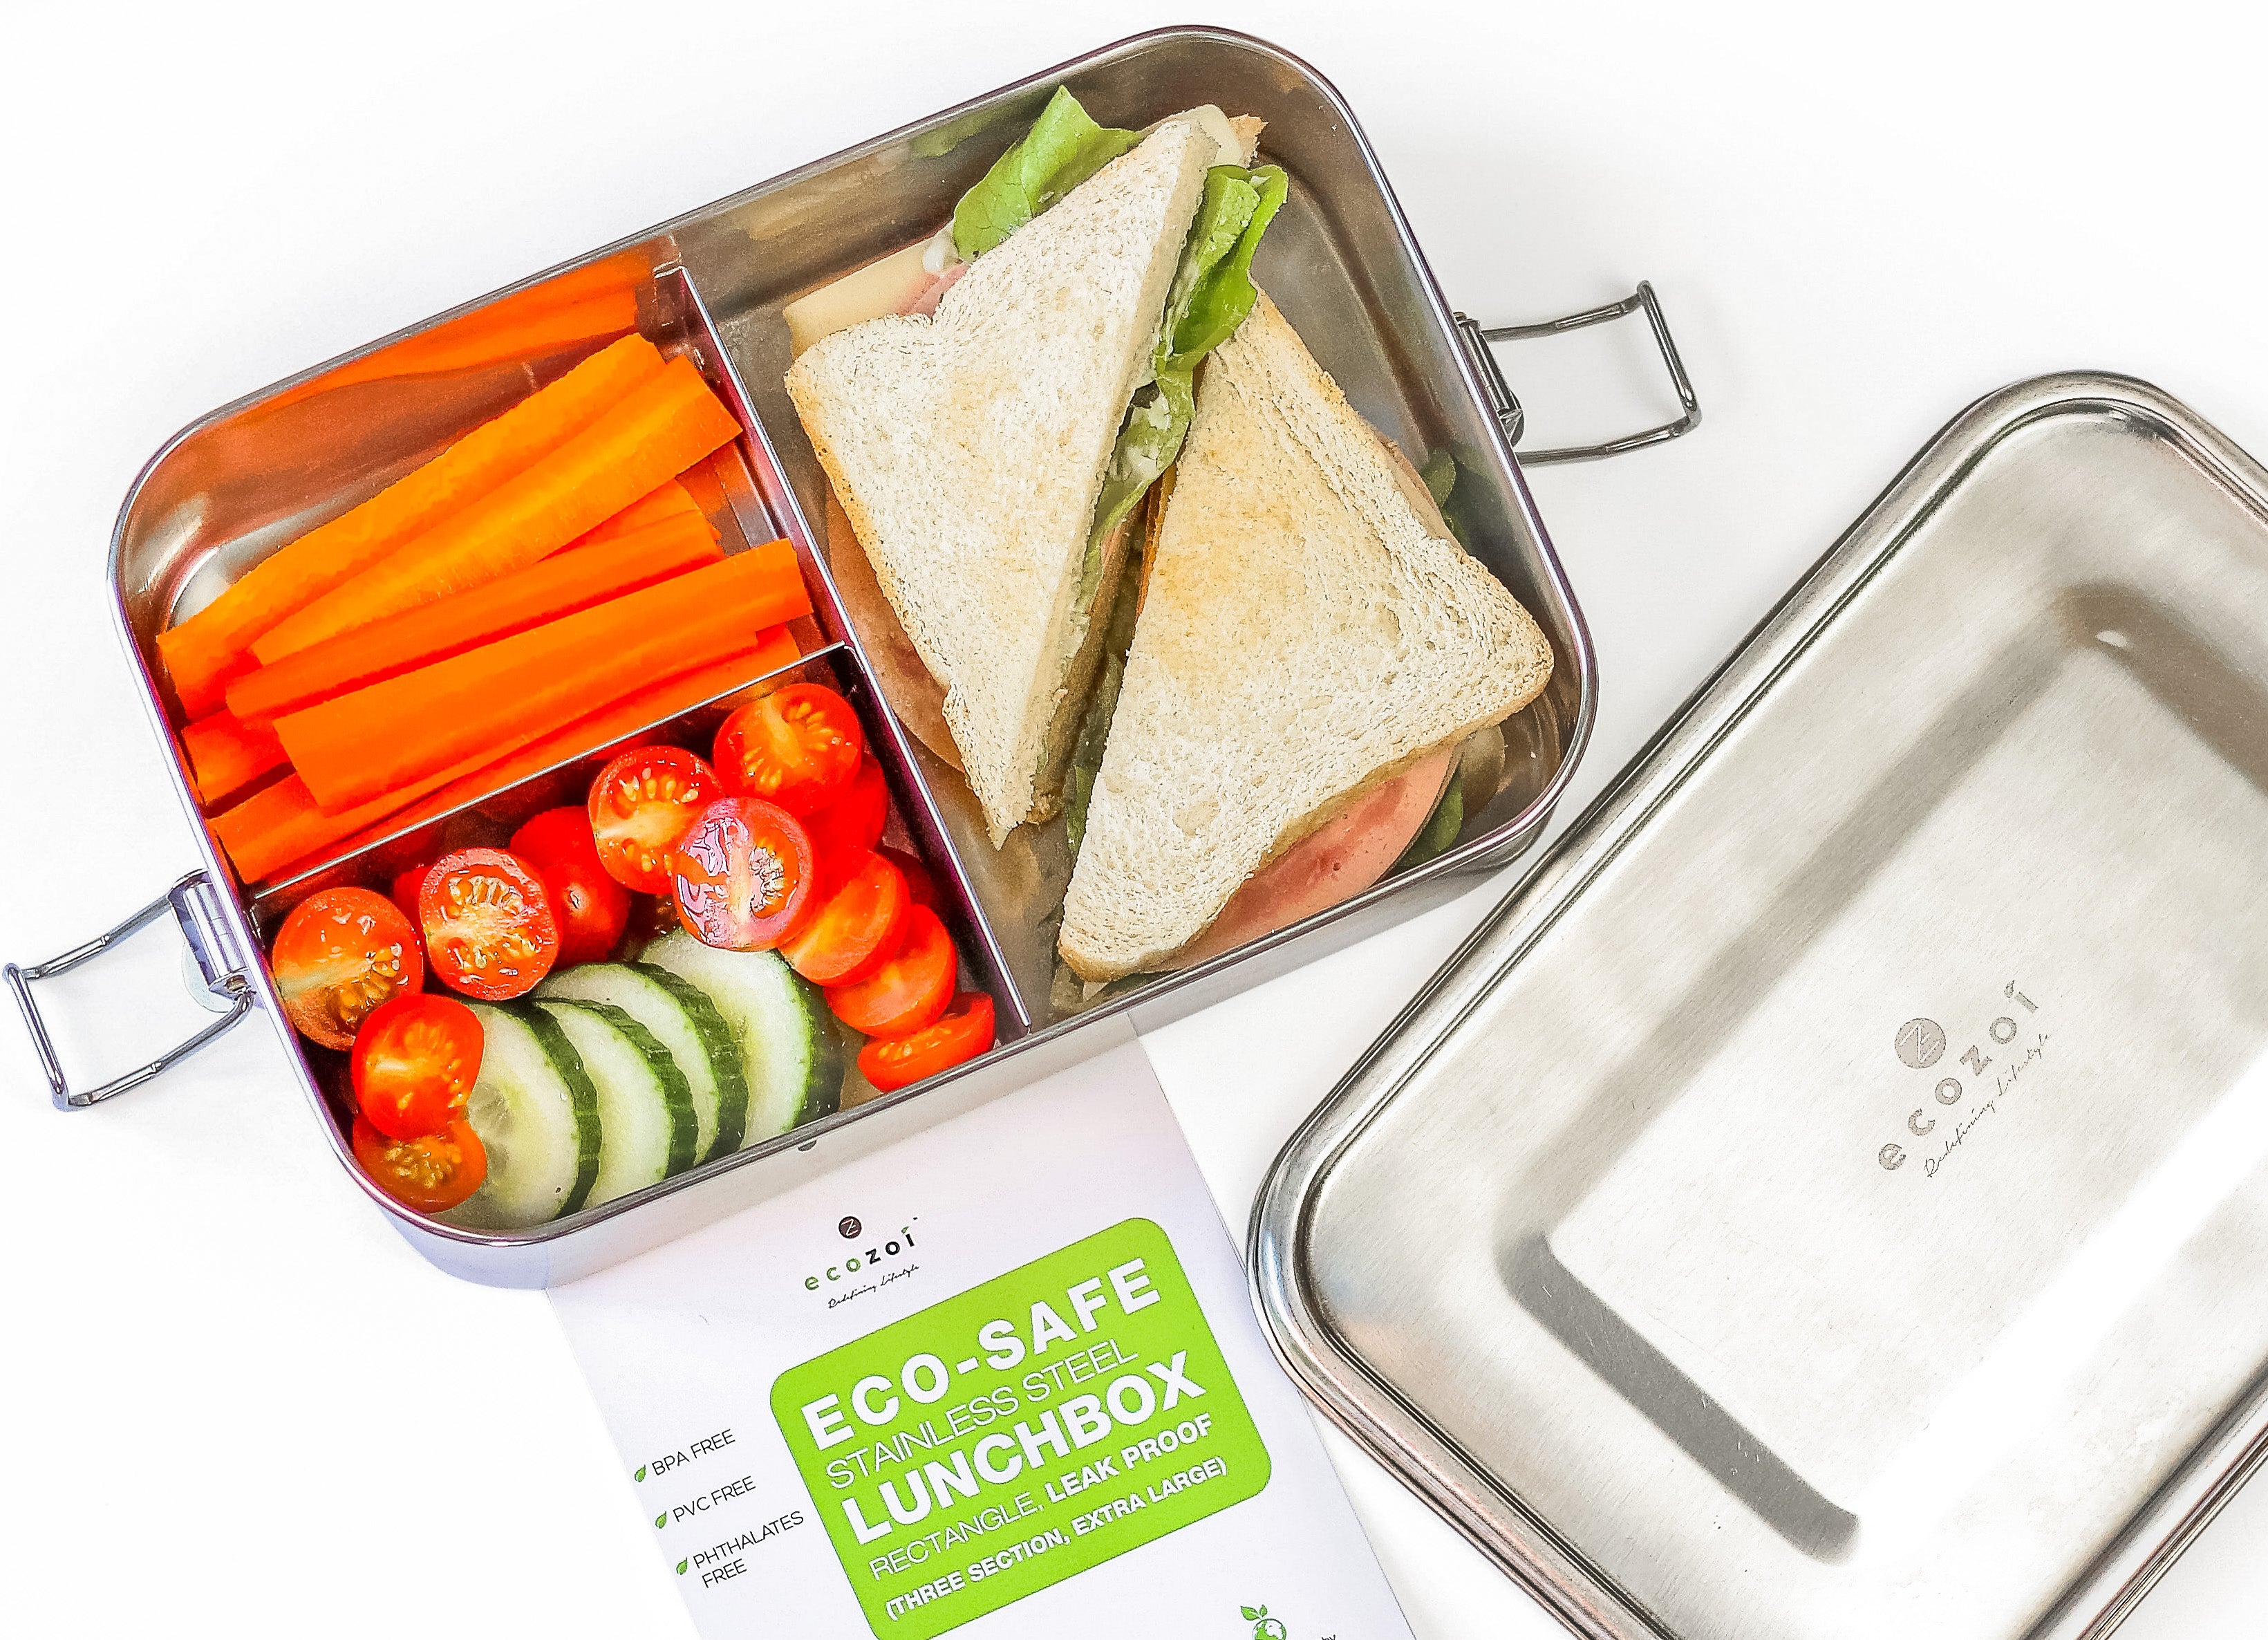 800ml Premium Stainless Steel Leakproof Lunch box with Mobile App – LftOvrs